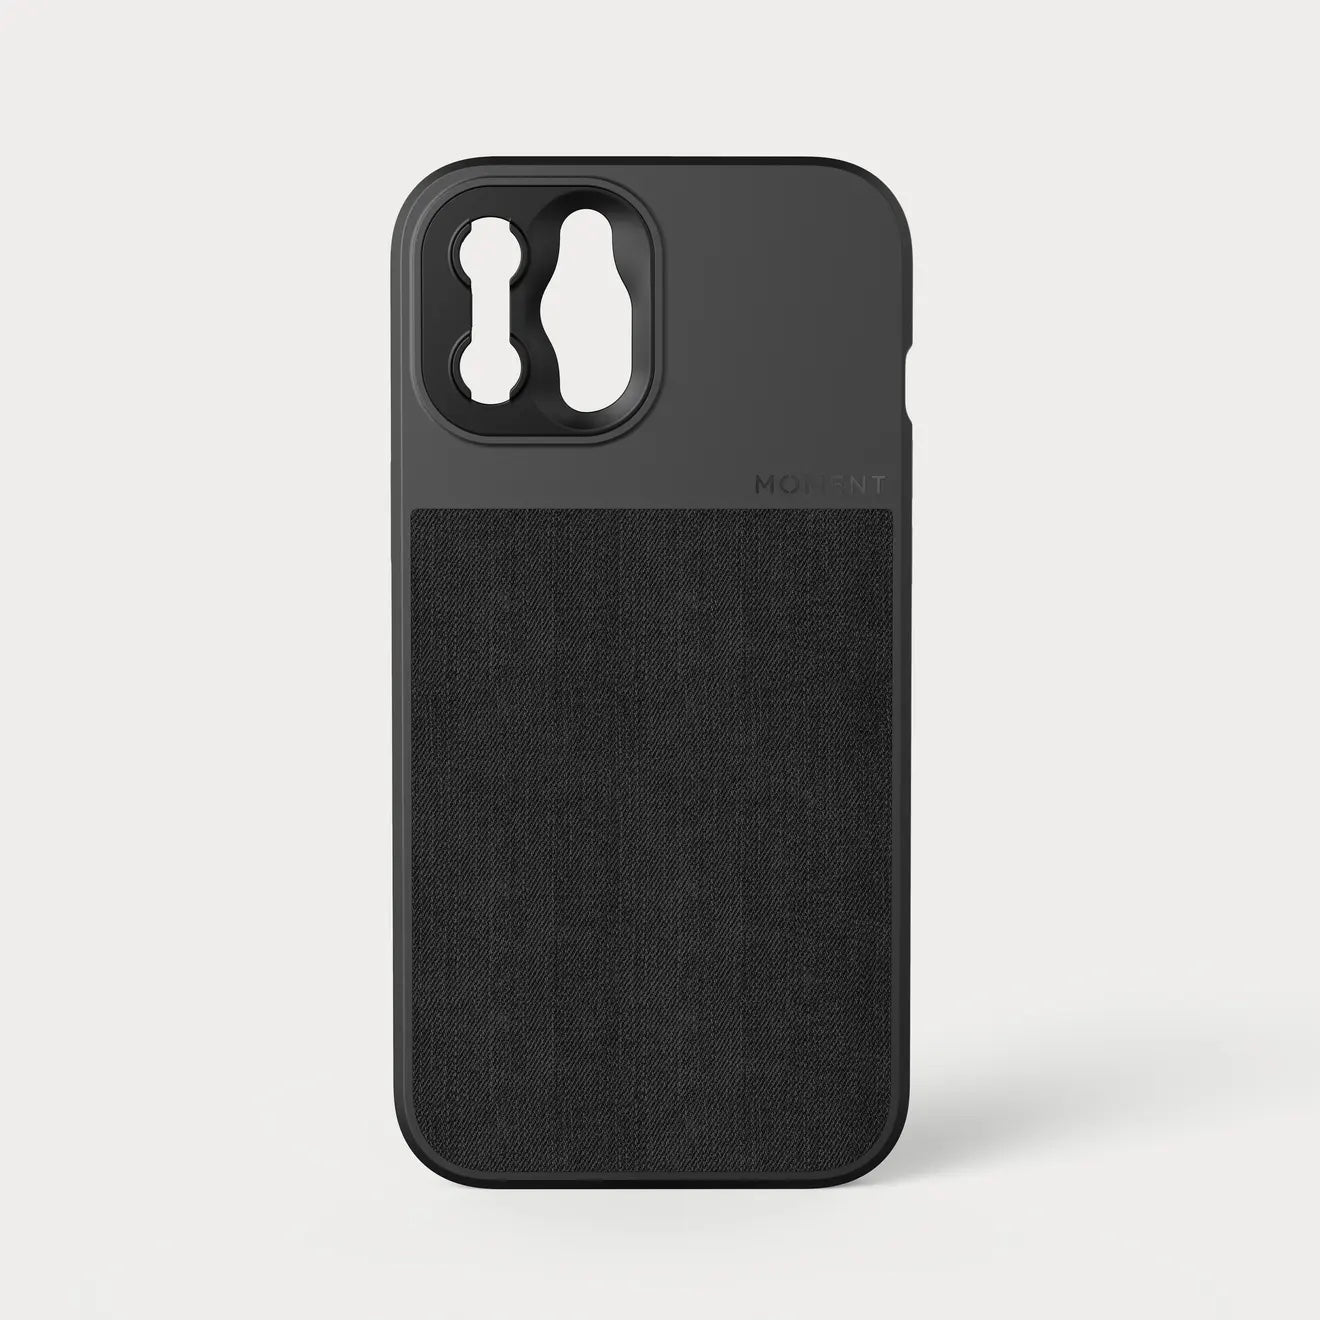 Case with MagSafe for iPhone 12 Series